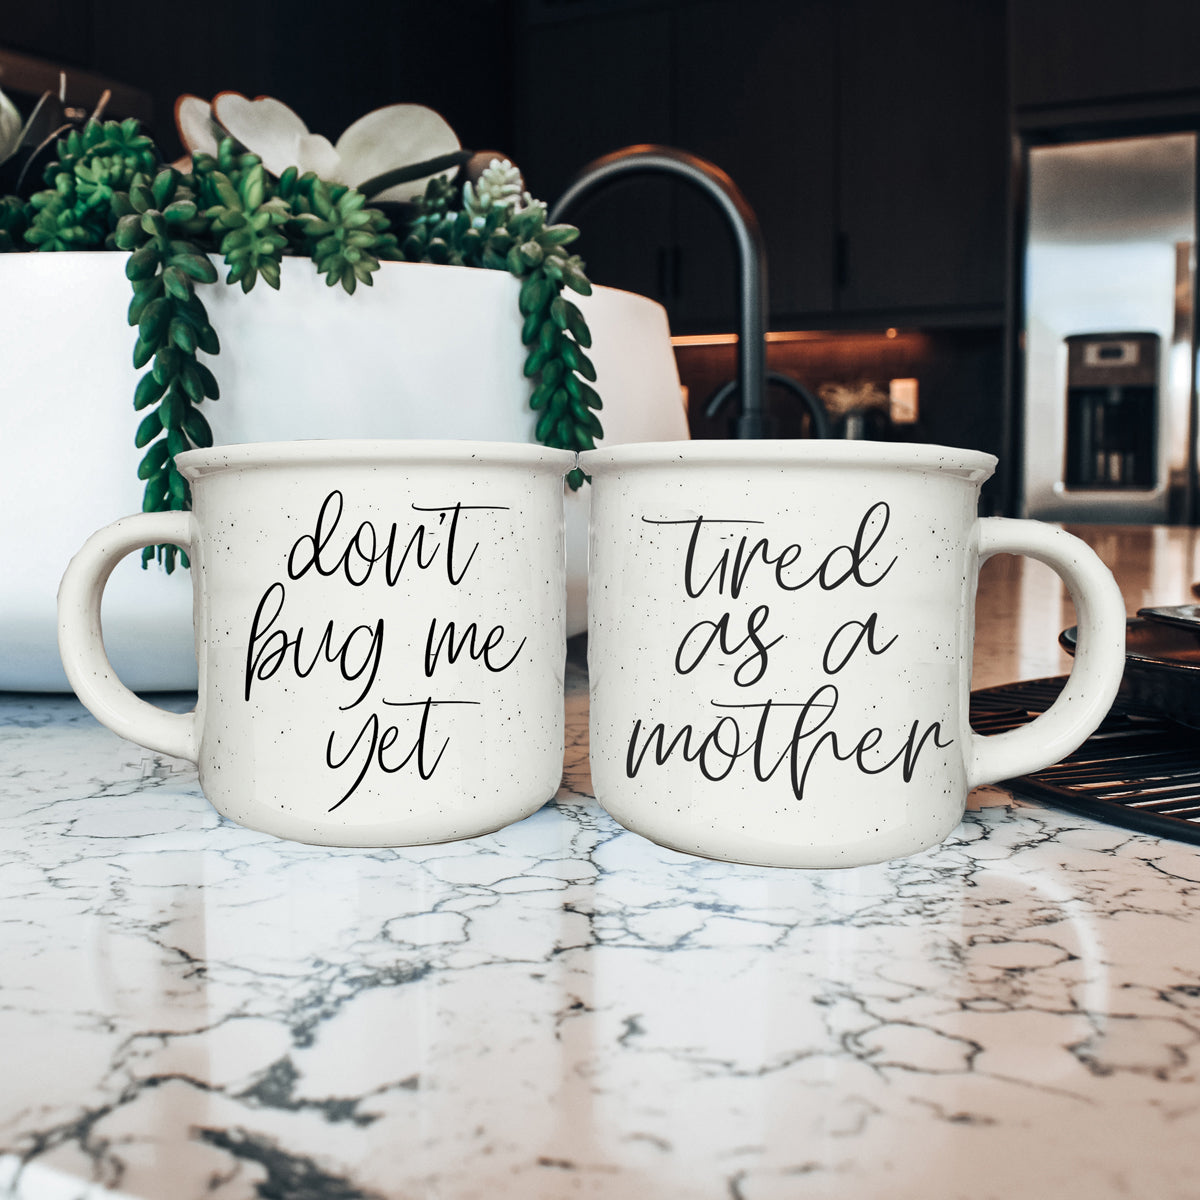 Best Mom Gift Ideas for her birthday or mothers day